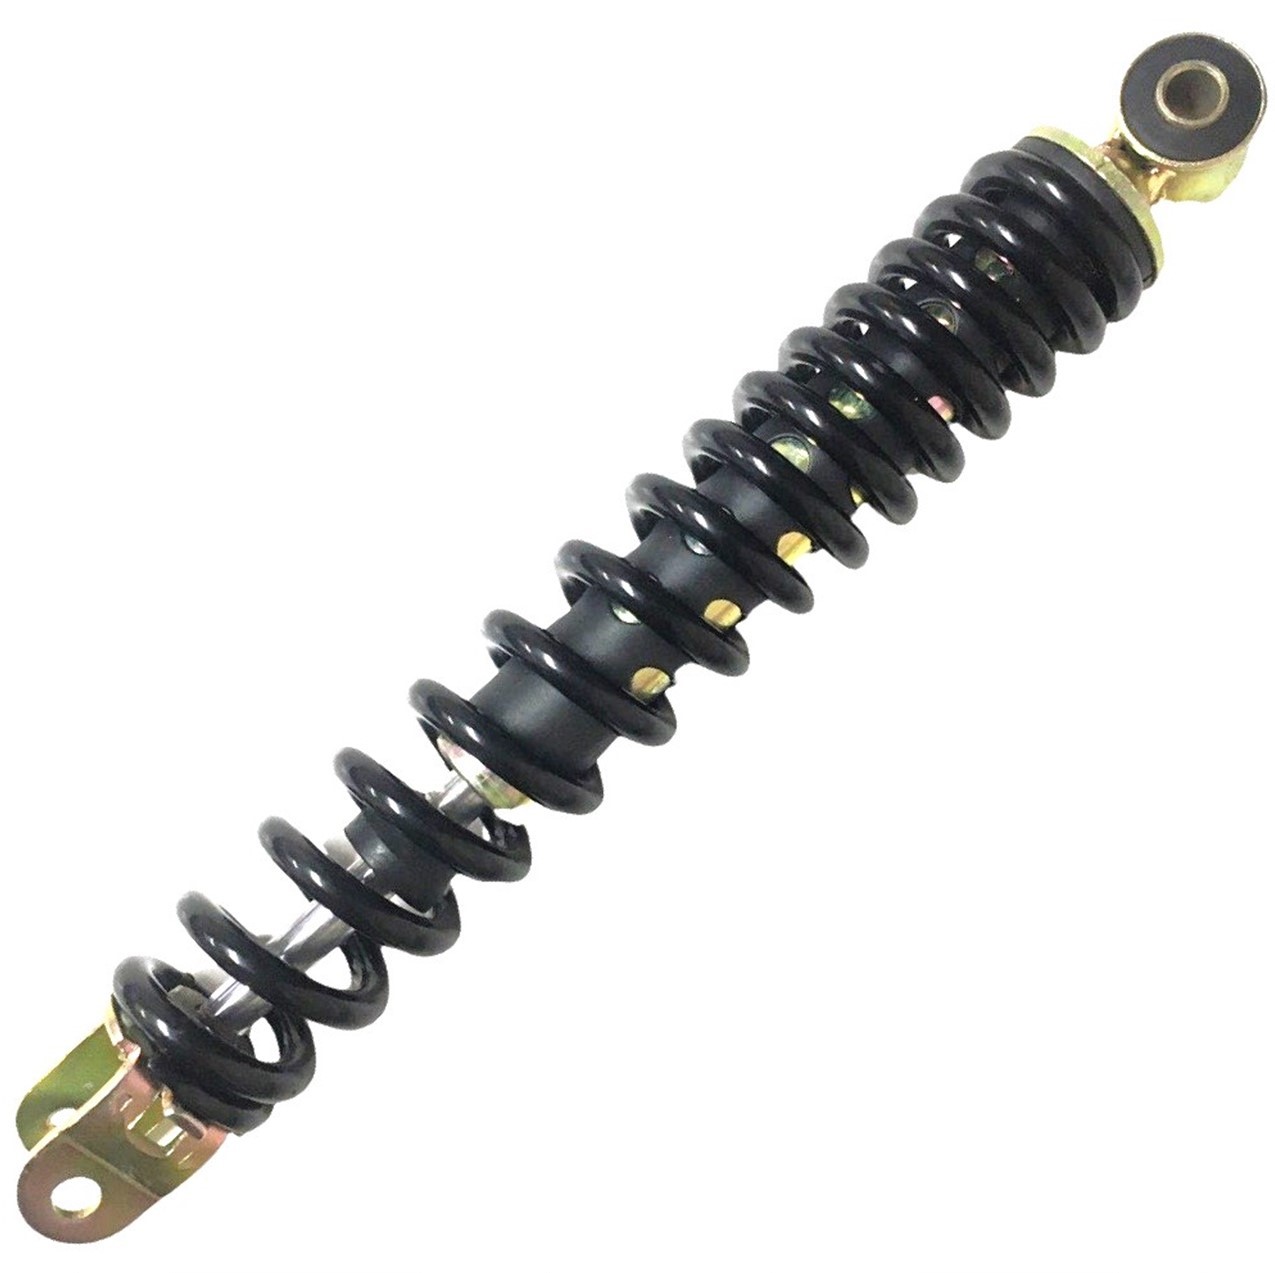 Rear Shock Eye c/c=11 1/2in Spring Ht=9in Spring OD=44mm Spring Thickness=8mm Bolt ID Top=10 Bottom= 8.5mm